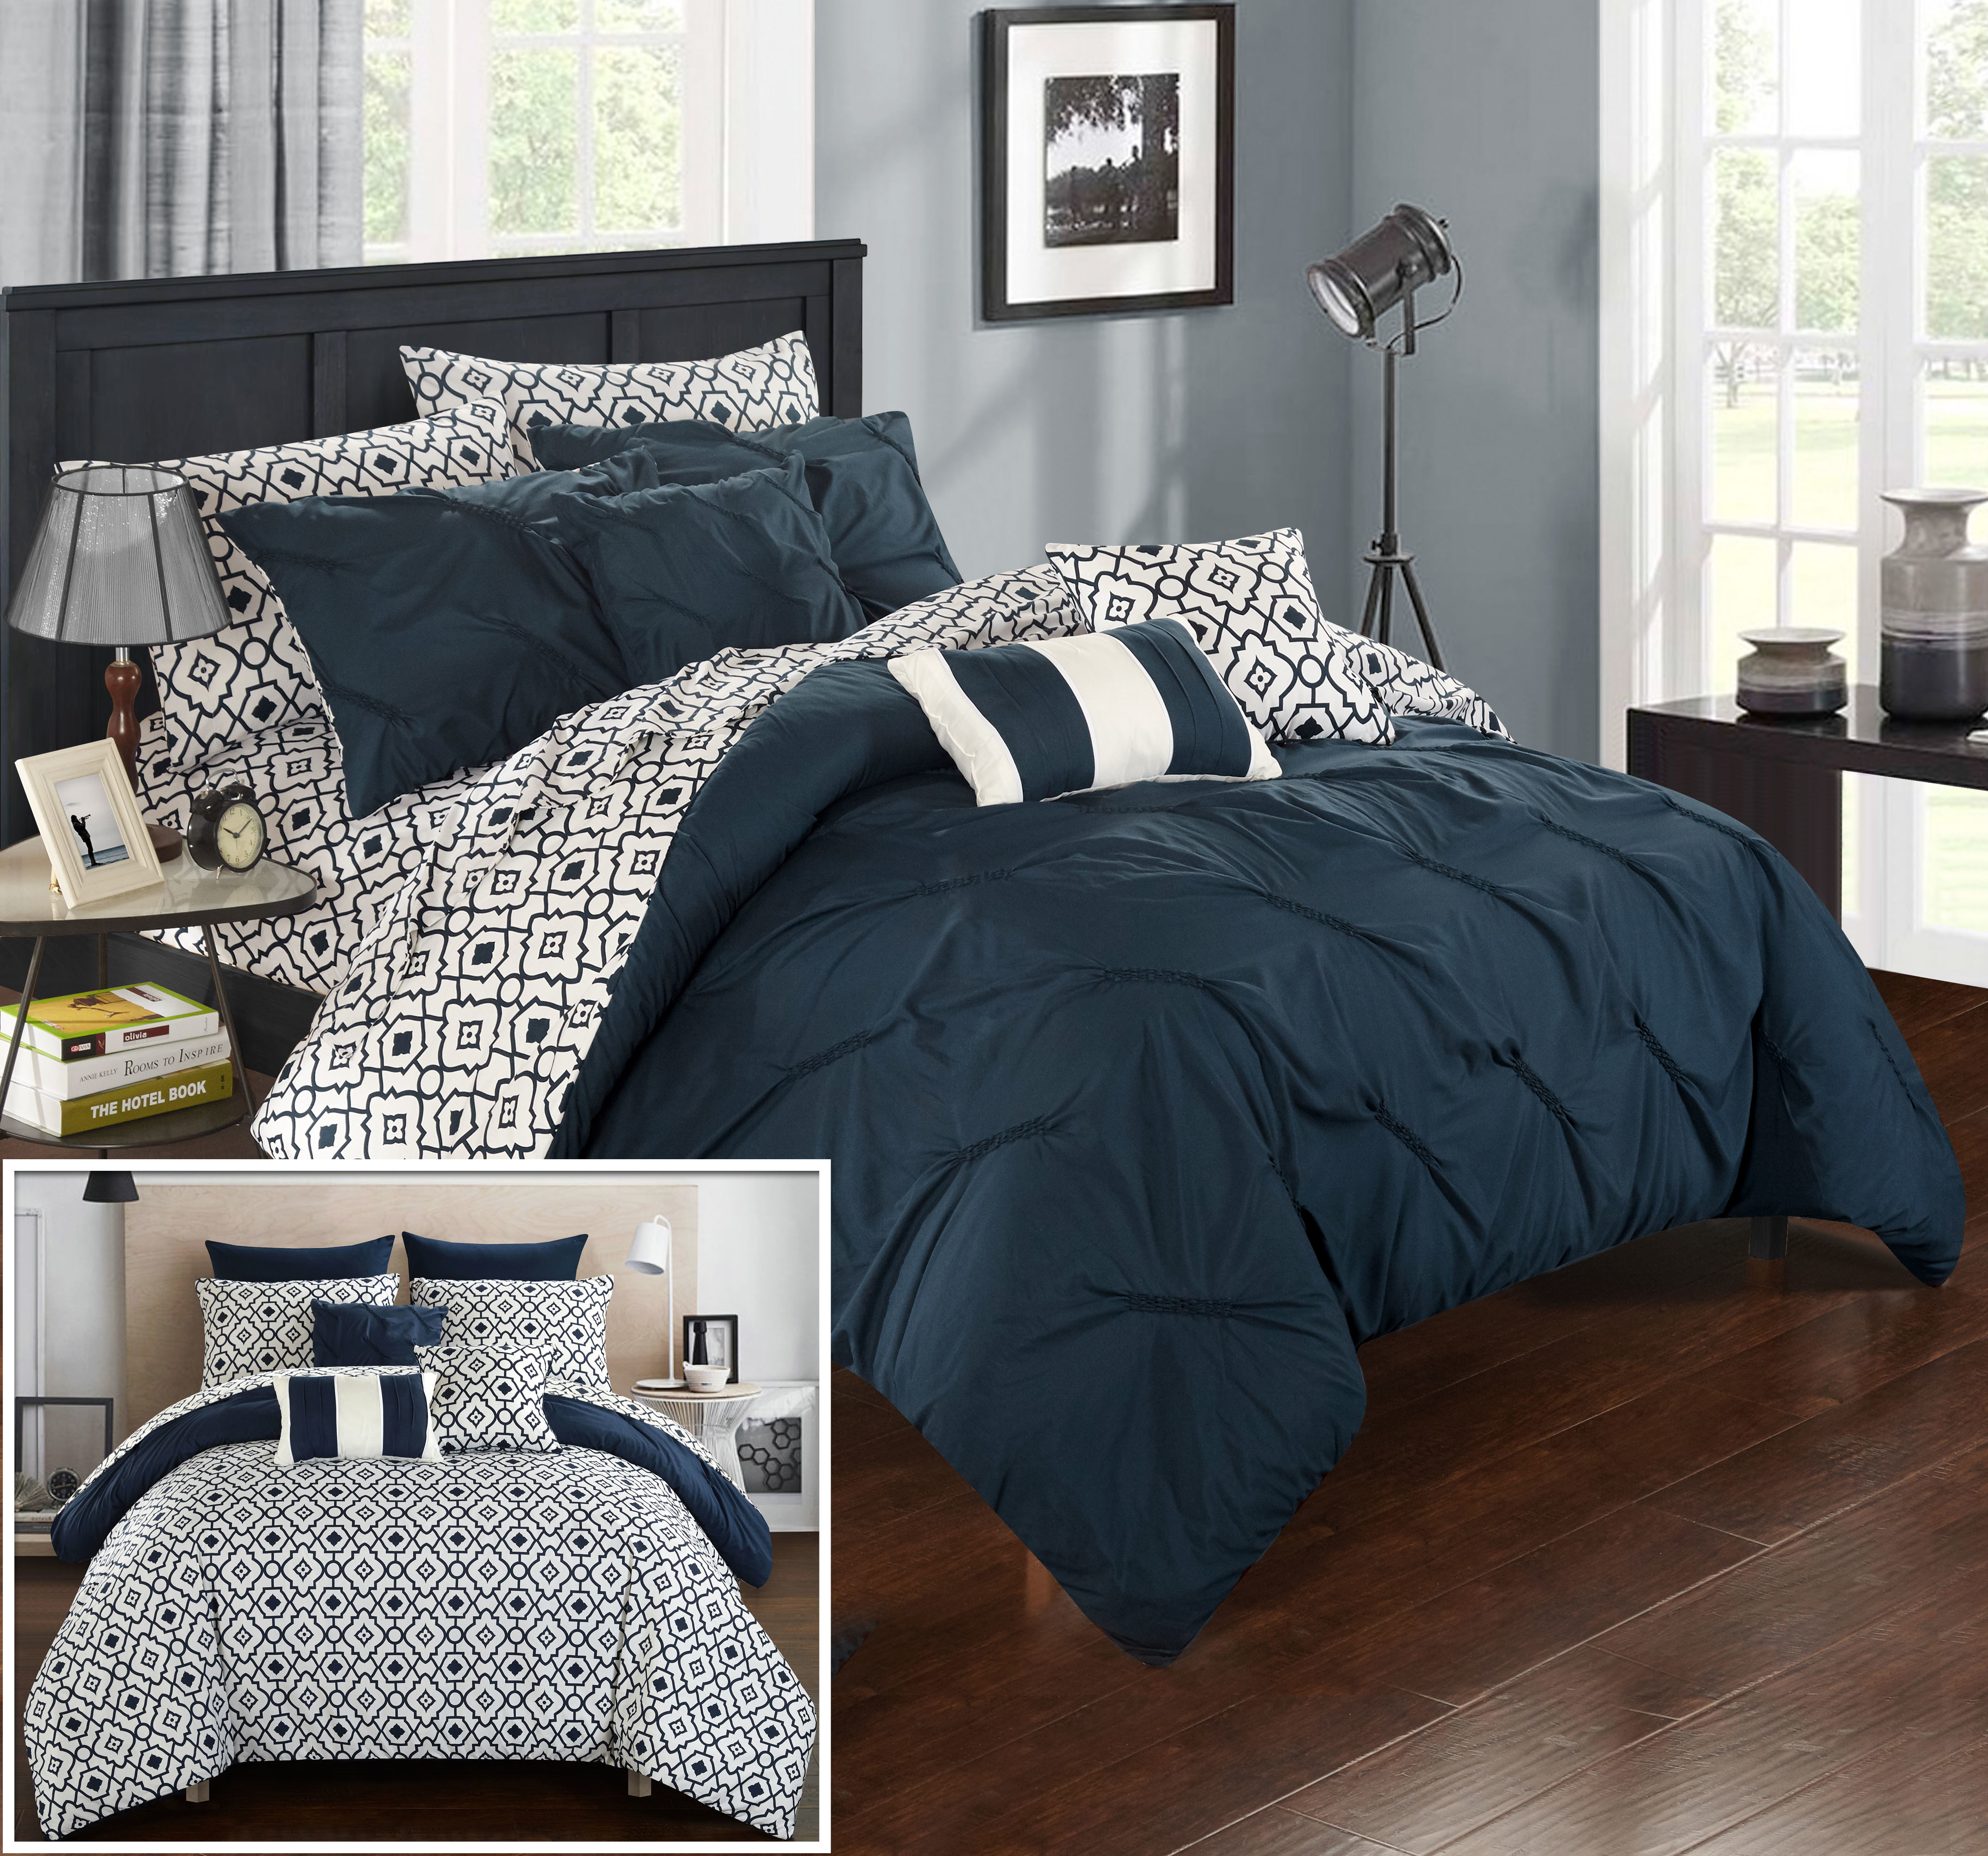 10 Piece Solice Pinch Pleated, Ruffled And Pleated Printed Reversible Complete Bed In A Bag Comforter Set With Sheet Set - Navy, King